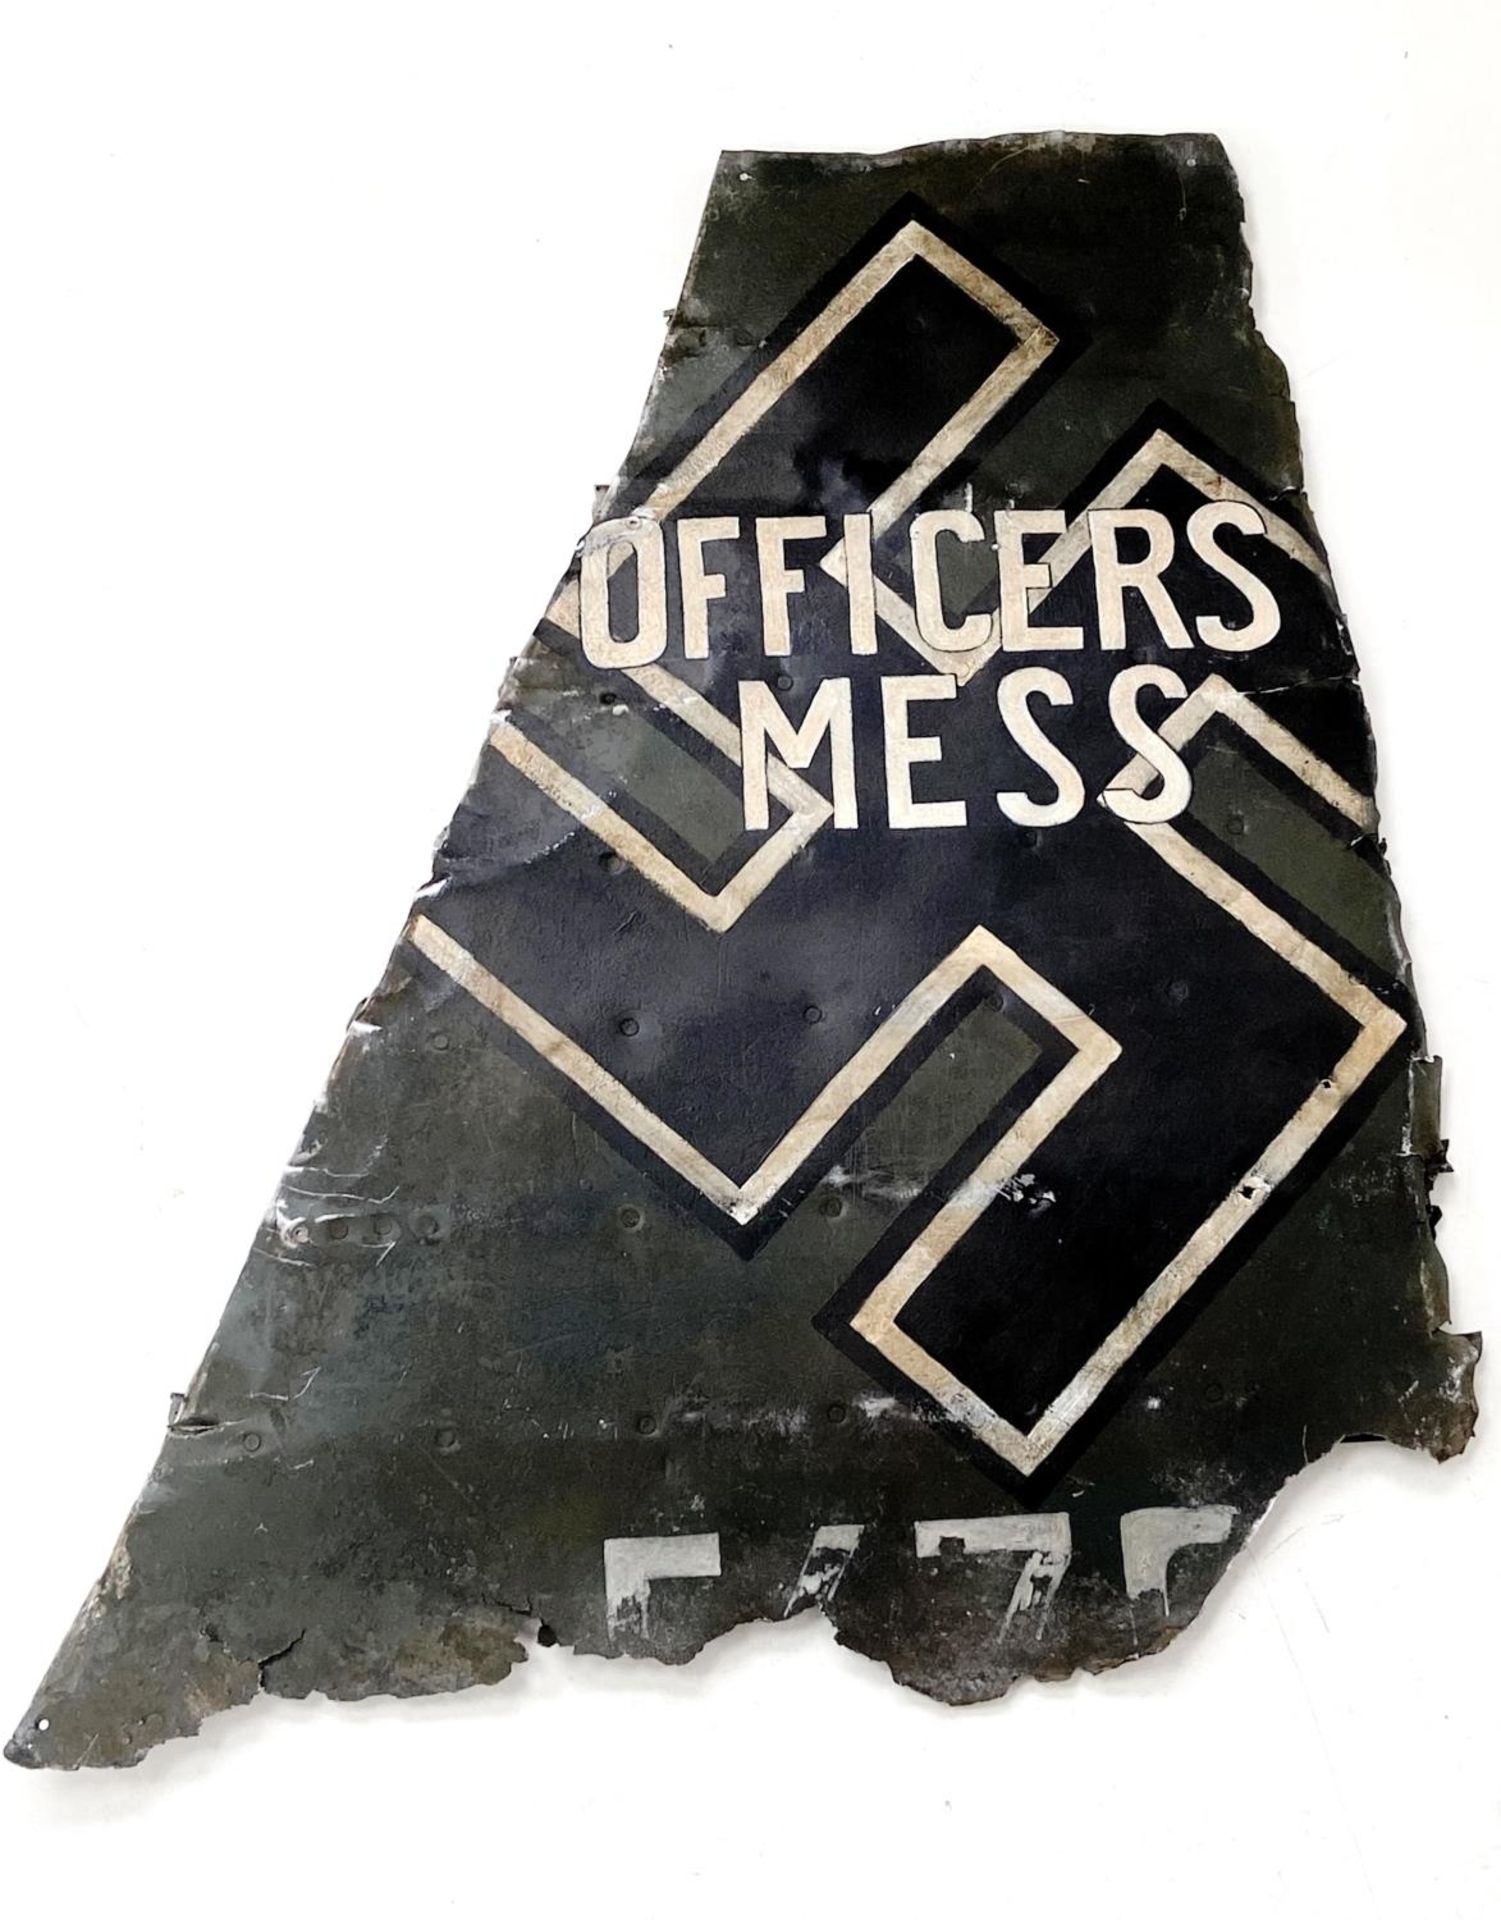 WW2 German Aircraft Tail Fragment, used as a sign for the Officers Mess.